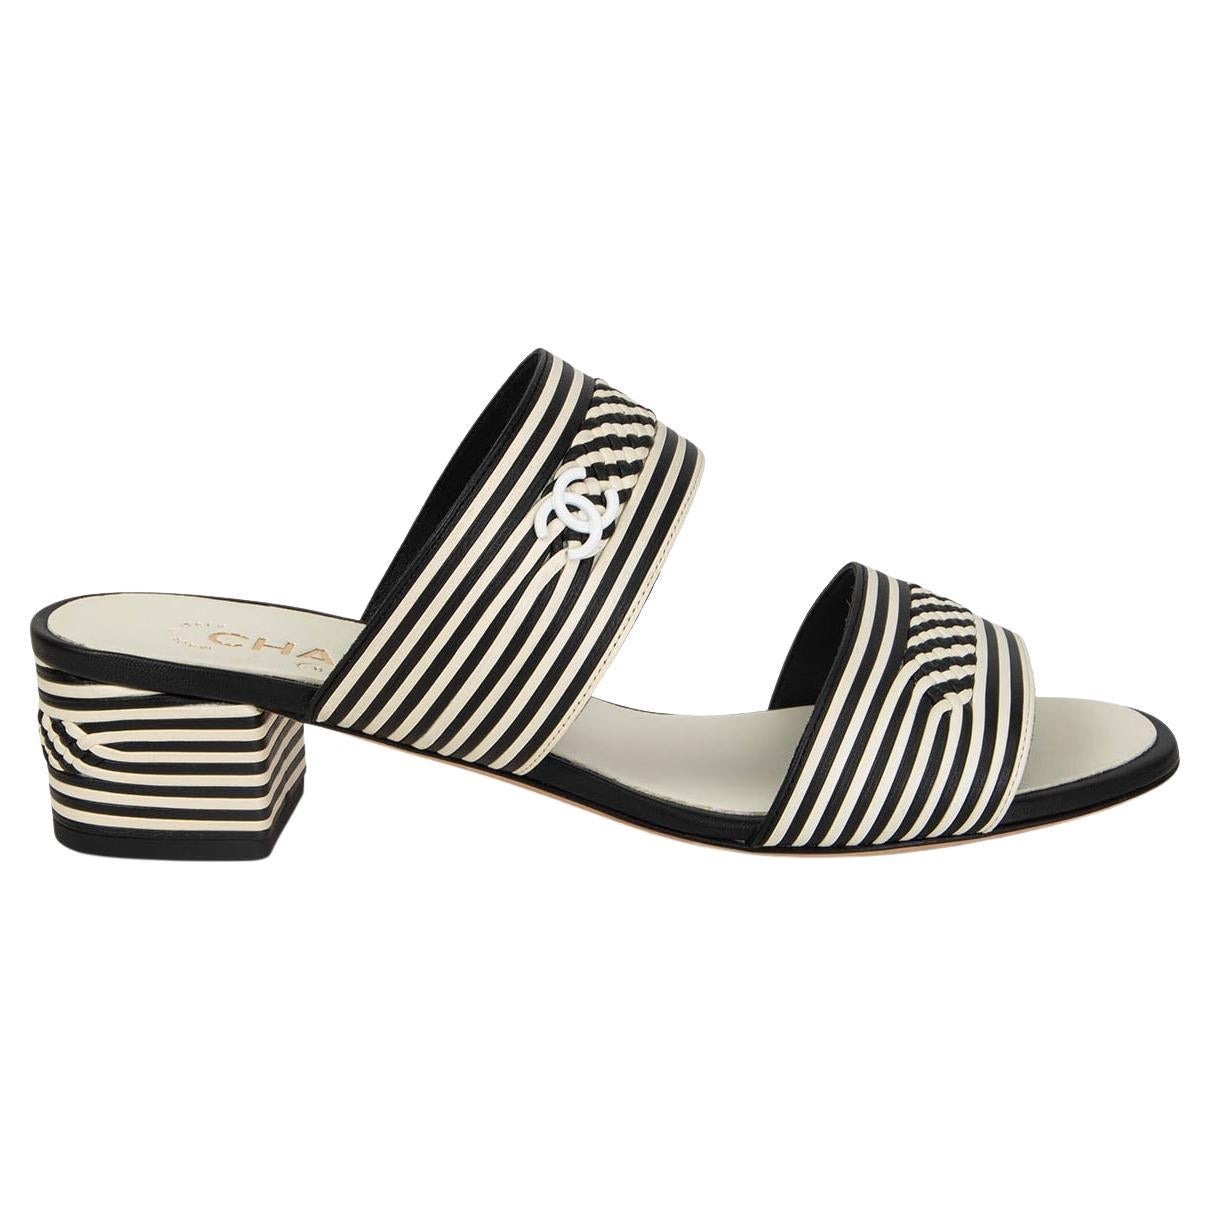 CHANEL black and white leather 2020 20C STRIPED BLOCK HEEL Sandals